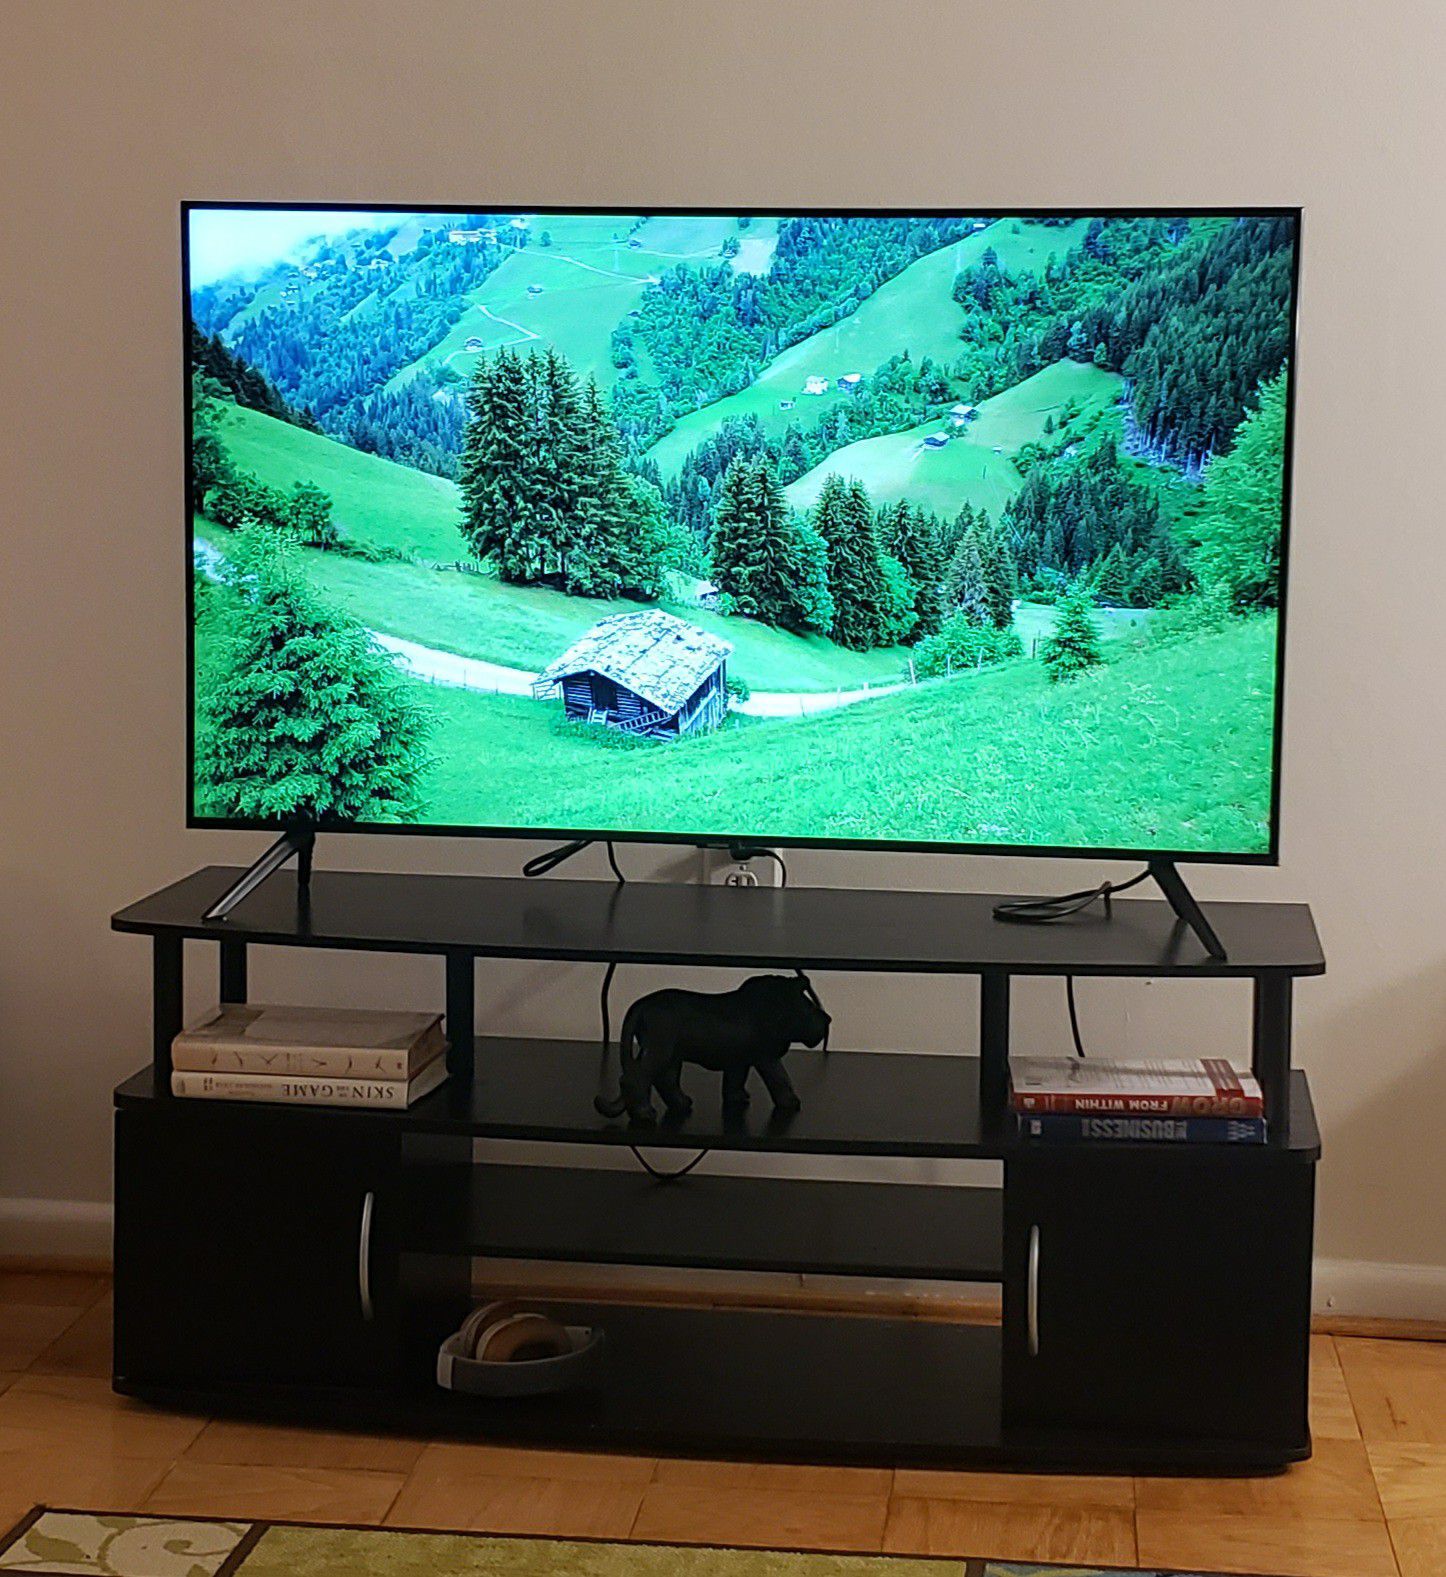 NEW Samsung crystal UHD 8 SERIES TU8000 50 inch smart tizen and tv stand